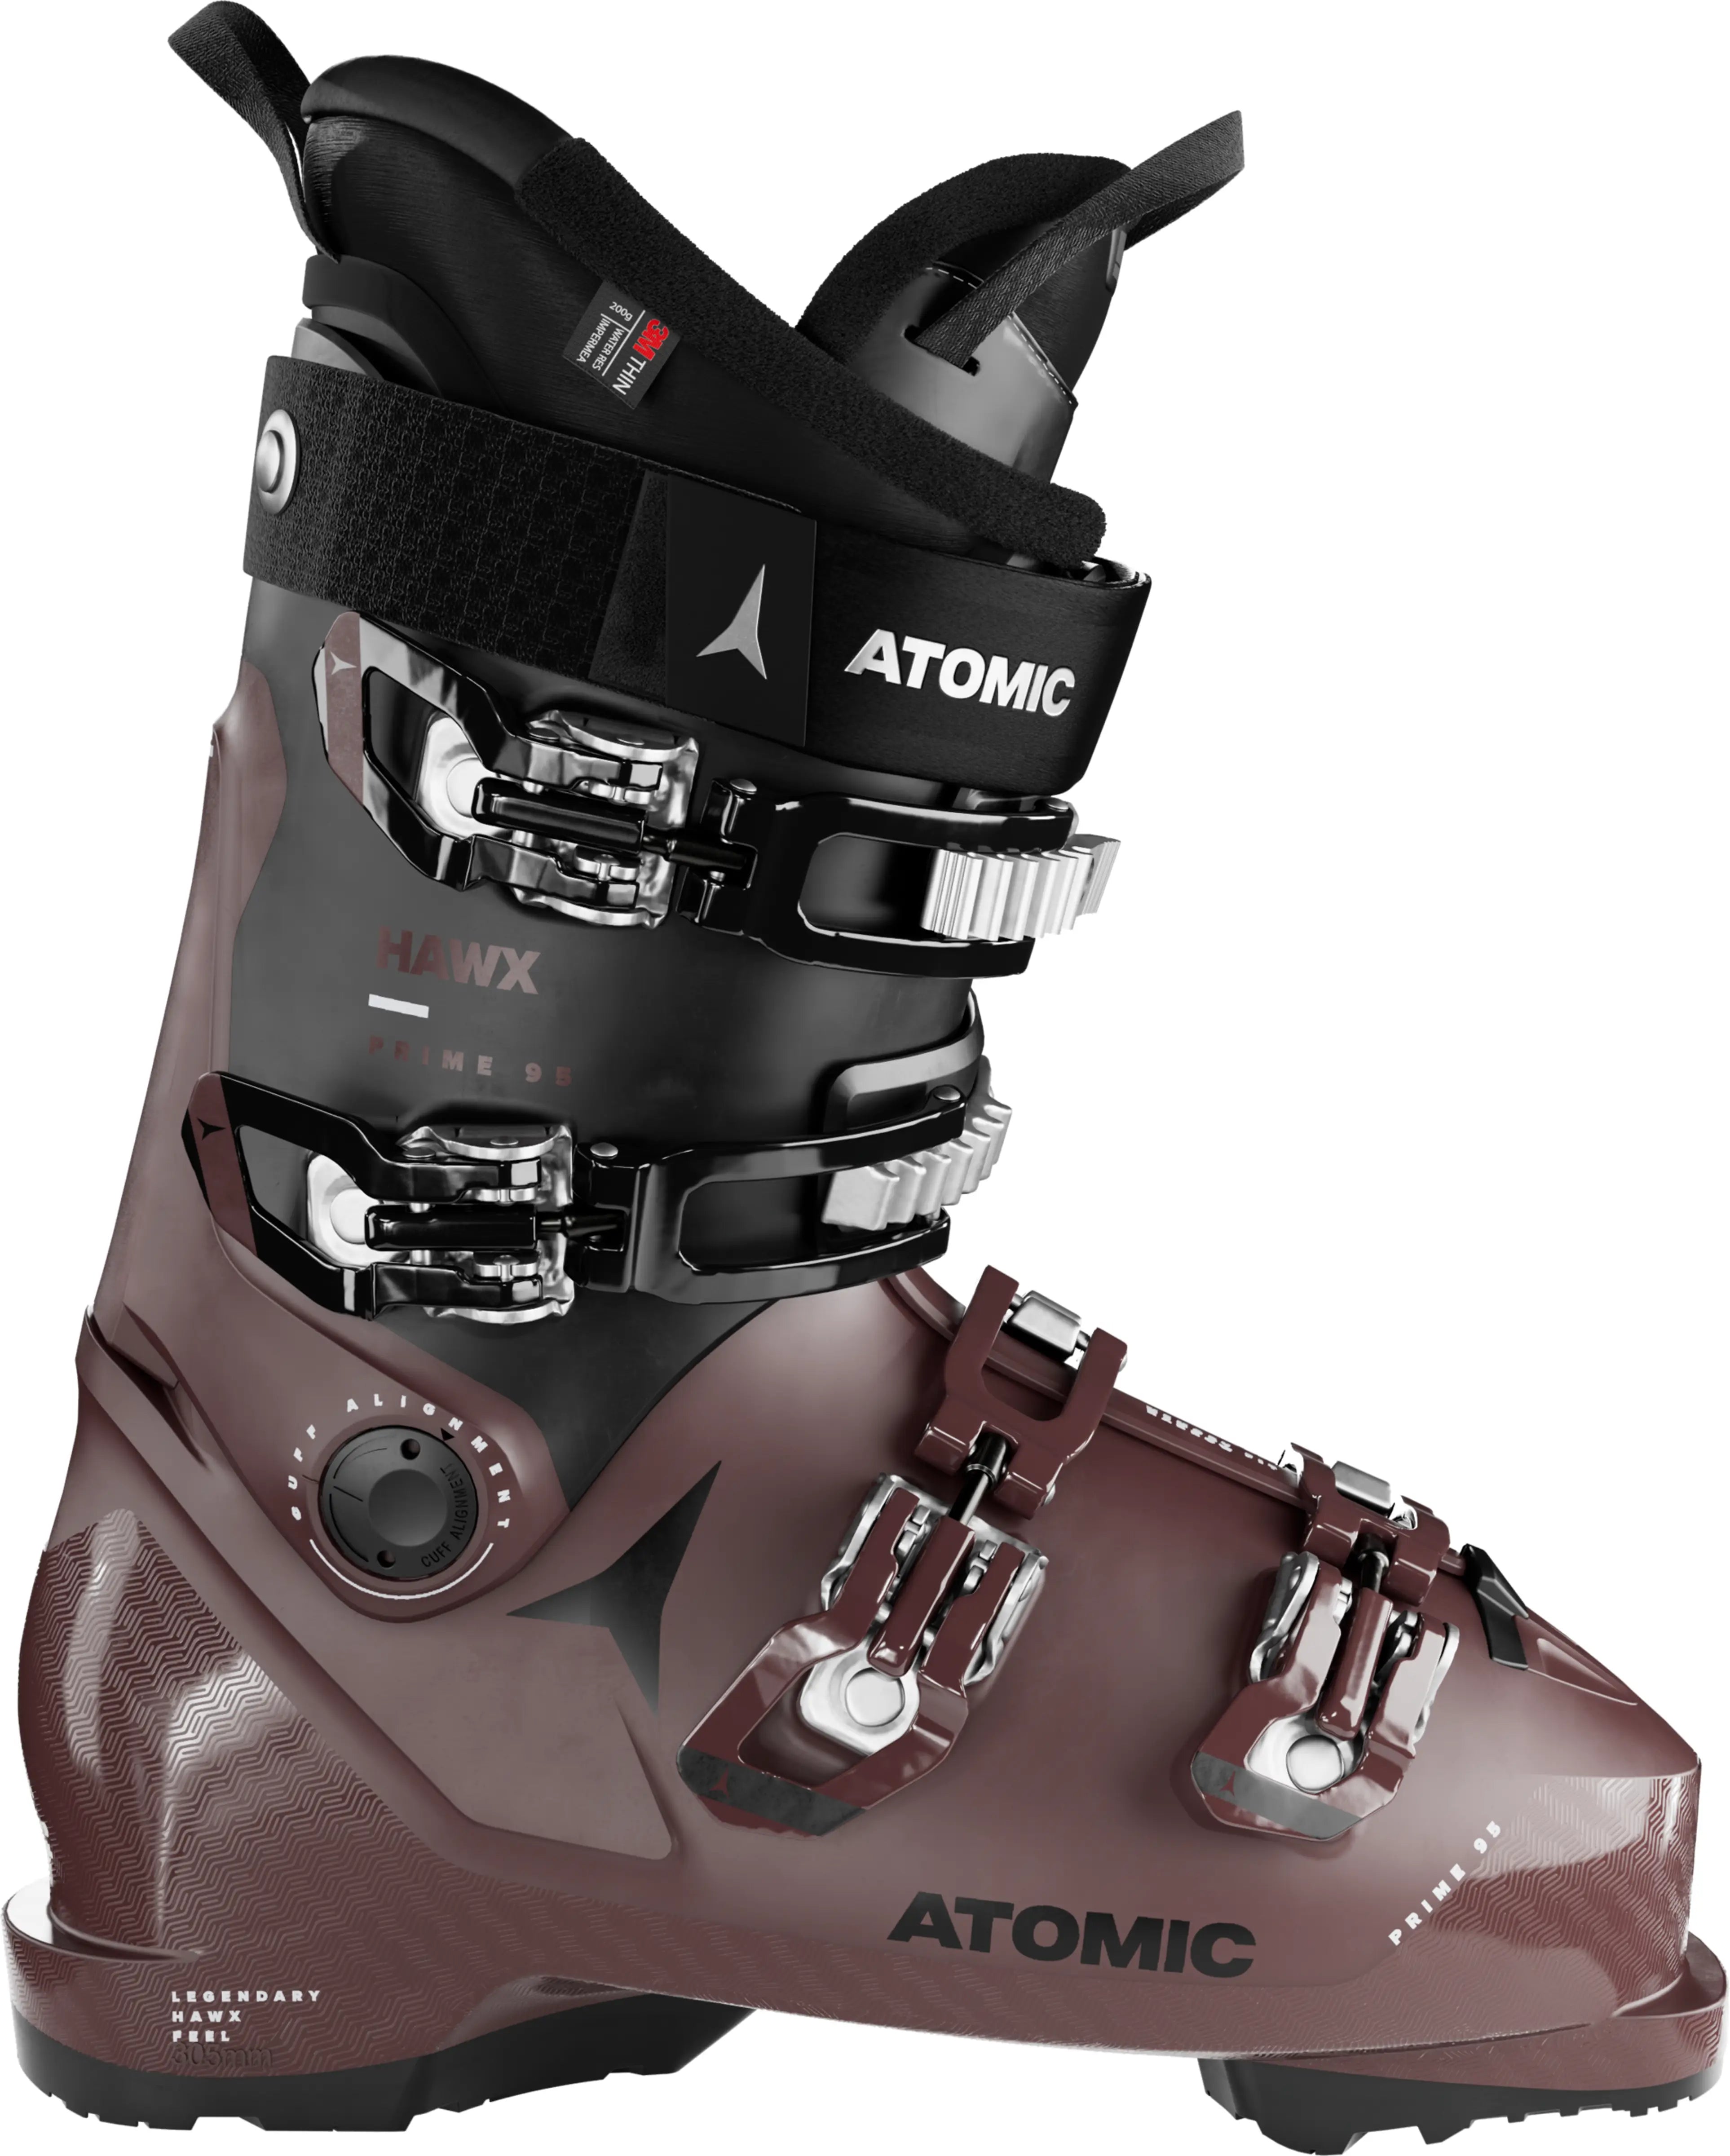 The Atomic Hawx Prime 95 W GW is an all-mountain ski boot with a medium fit and flex for female skiers with a medium build.